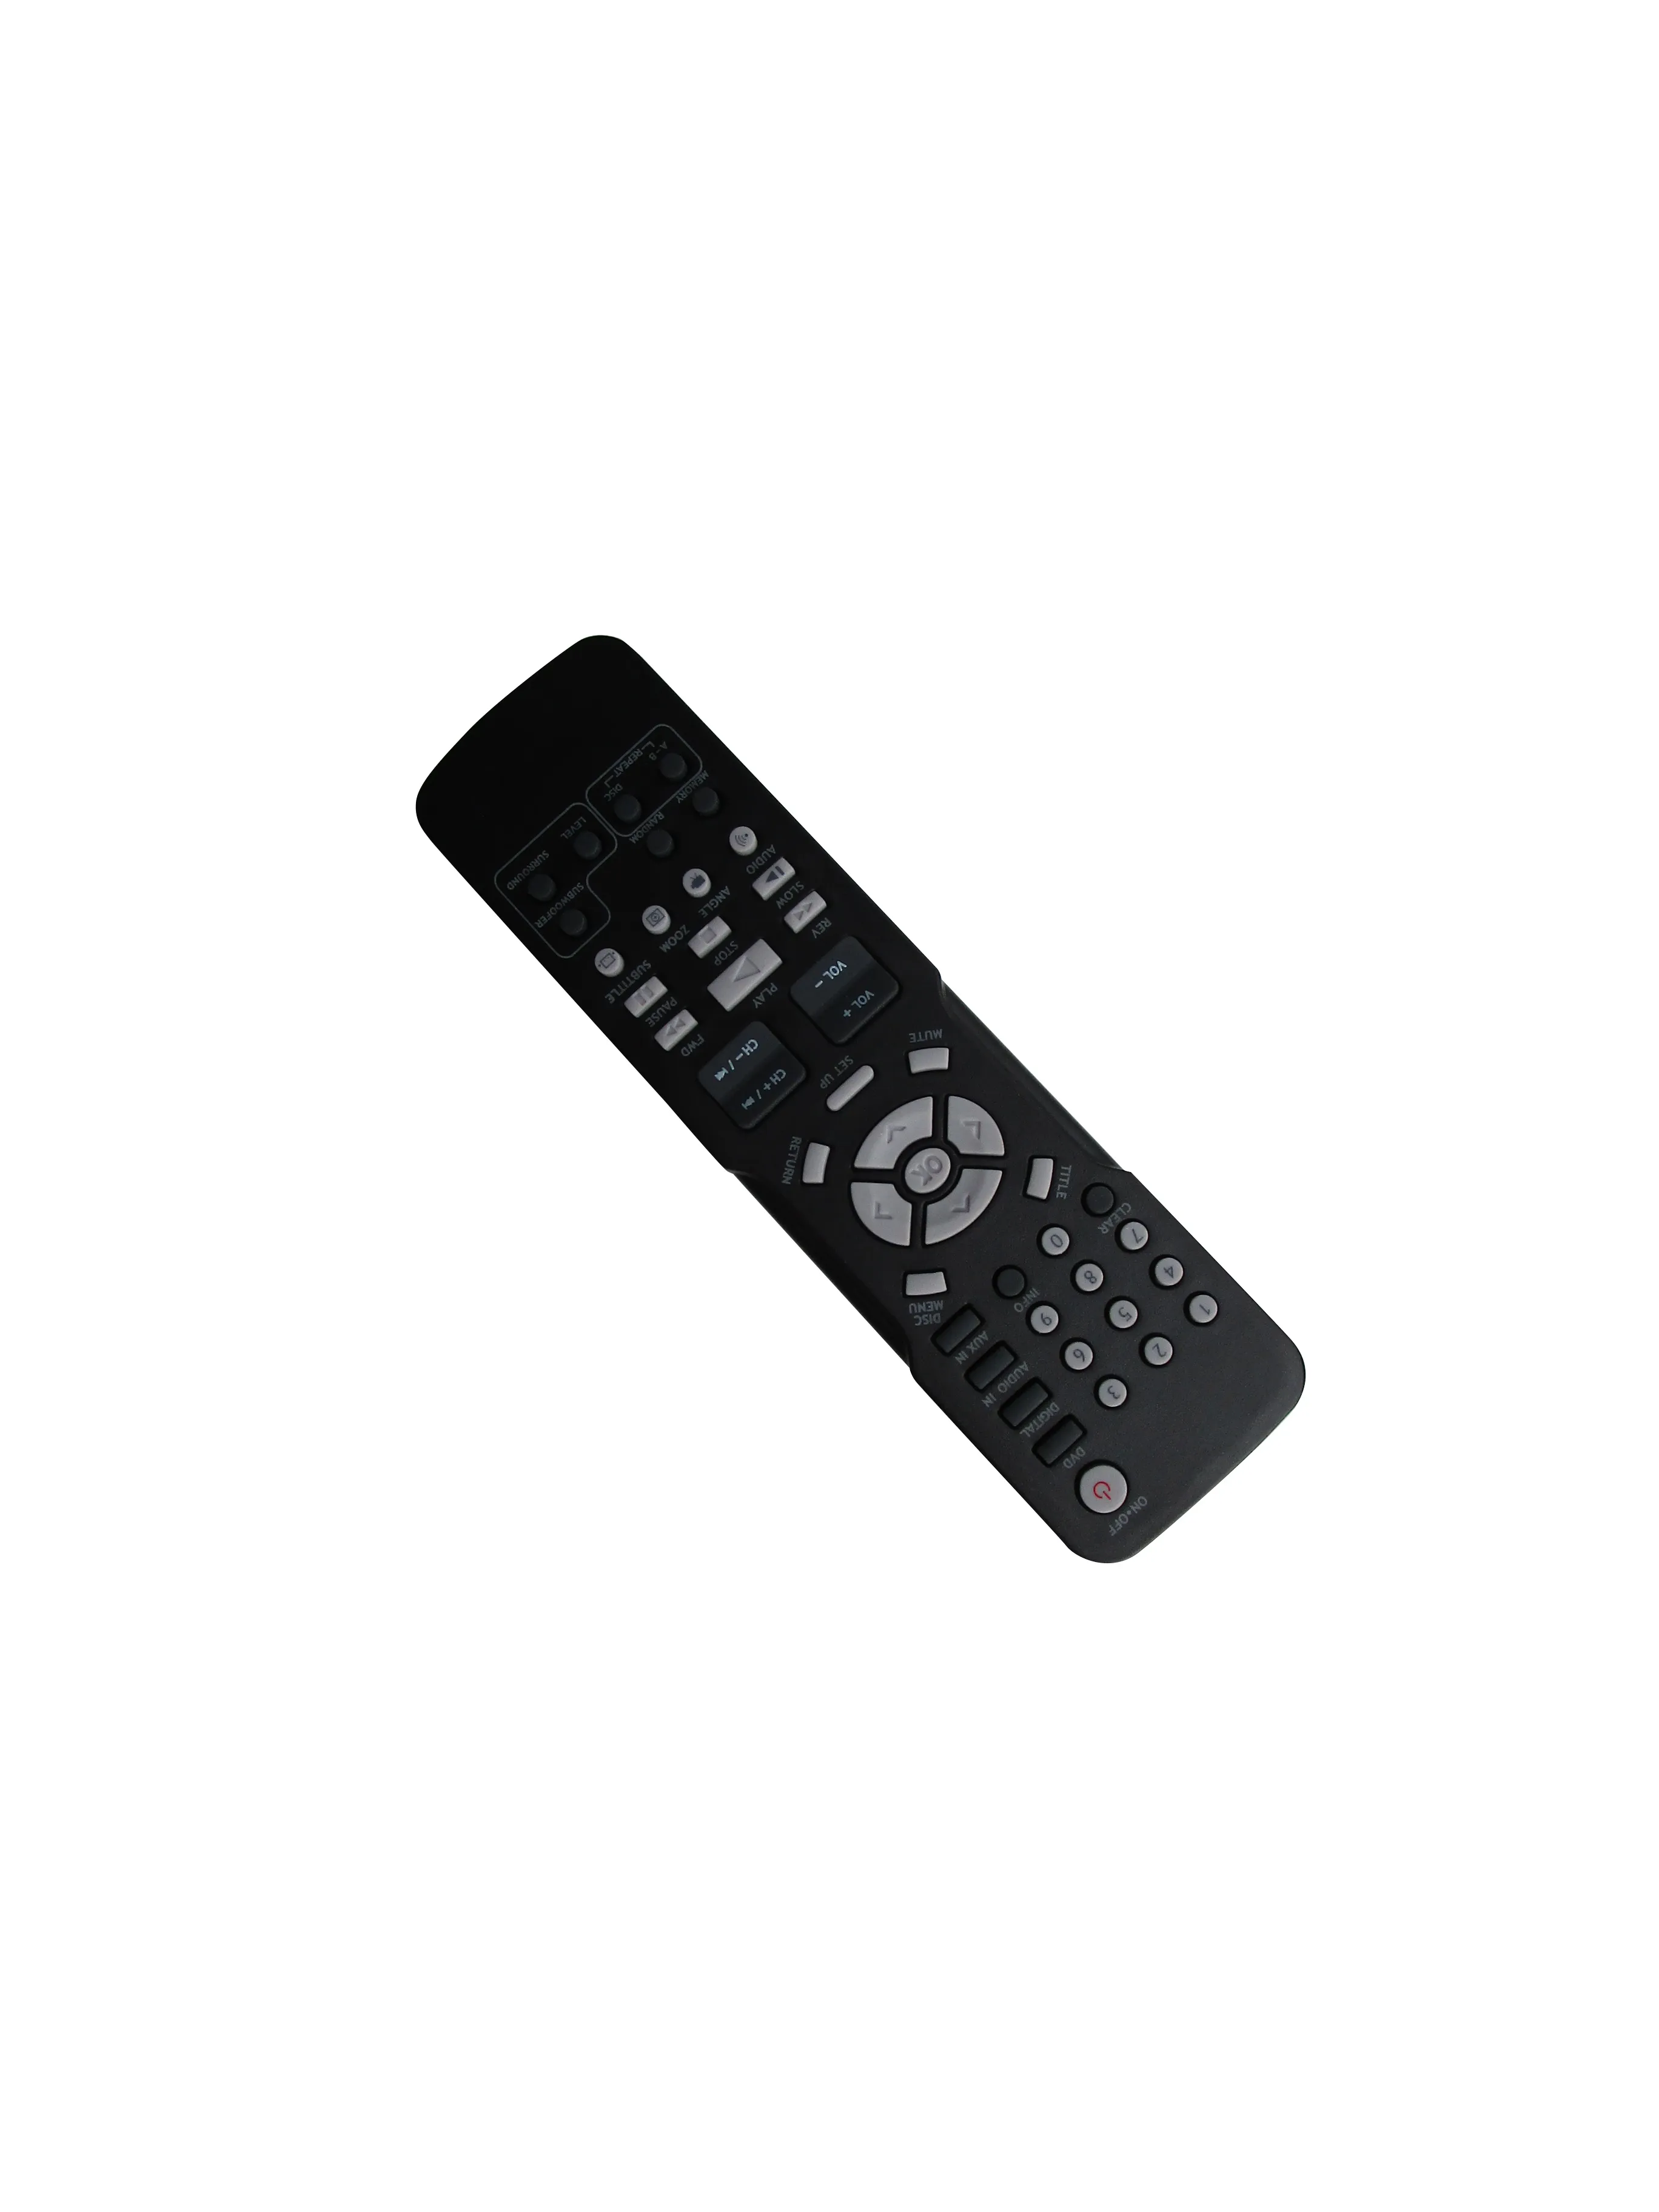 Remote Control For RCA RCR192AA9 RTD315WR RCR192AA4 RTD315W RTD316W RTD317W RCR192AA1 RTD206 RTD207 Blu-ray DVD 5.1 Home Theater System